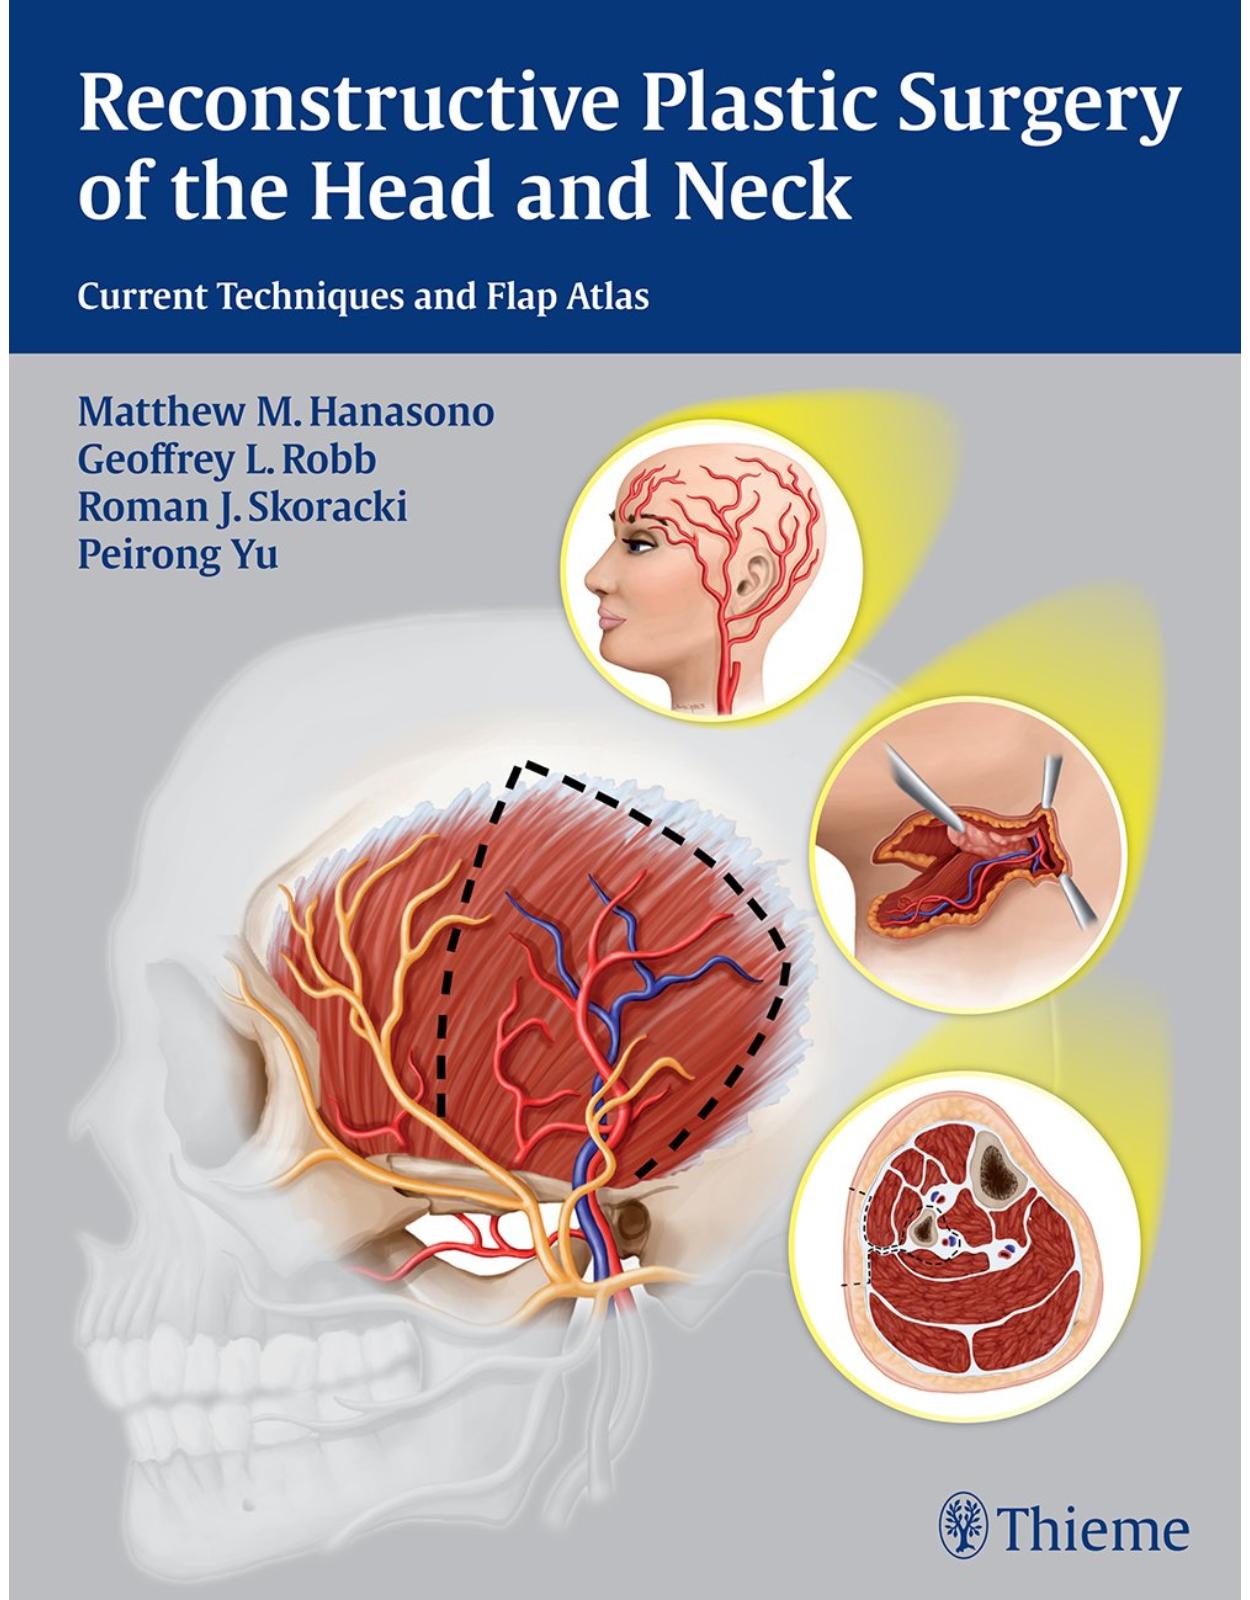 Reconstructive Plastic Surgery of the Head and Neck: Current Techniques and Flap Atlas